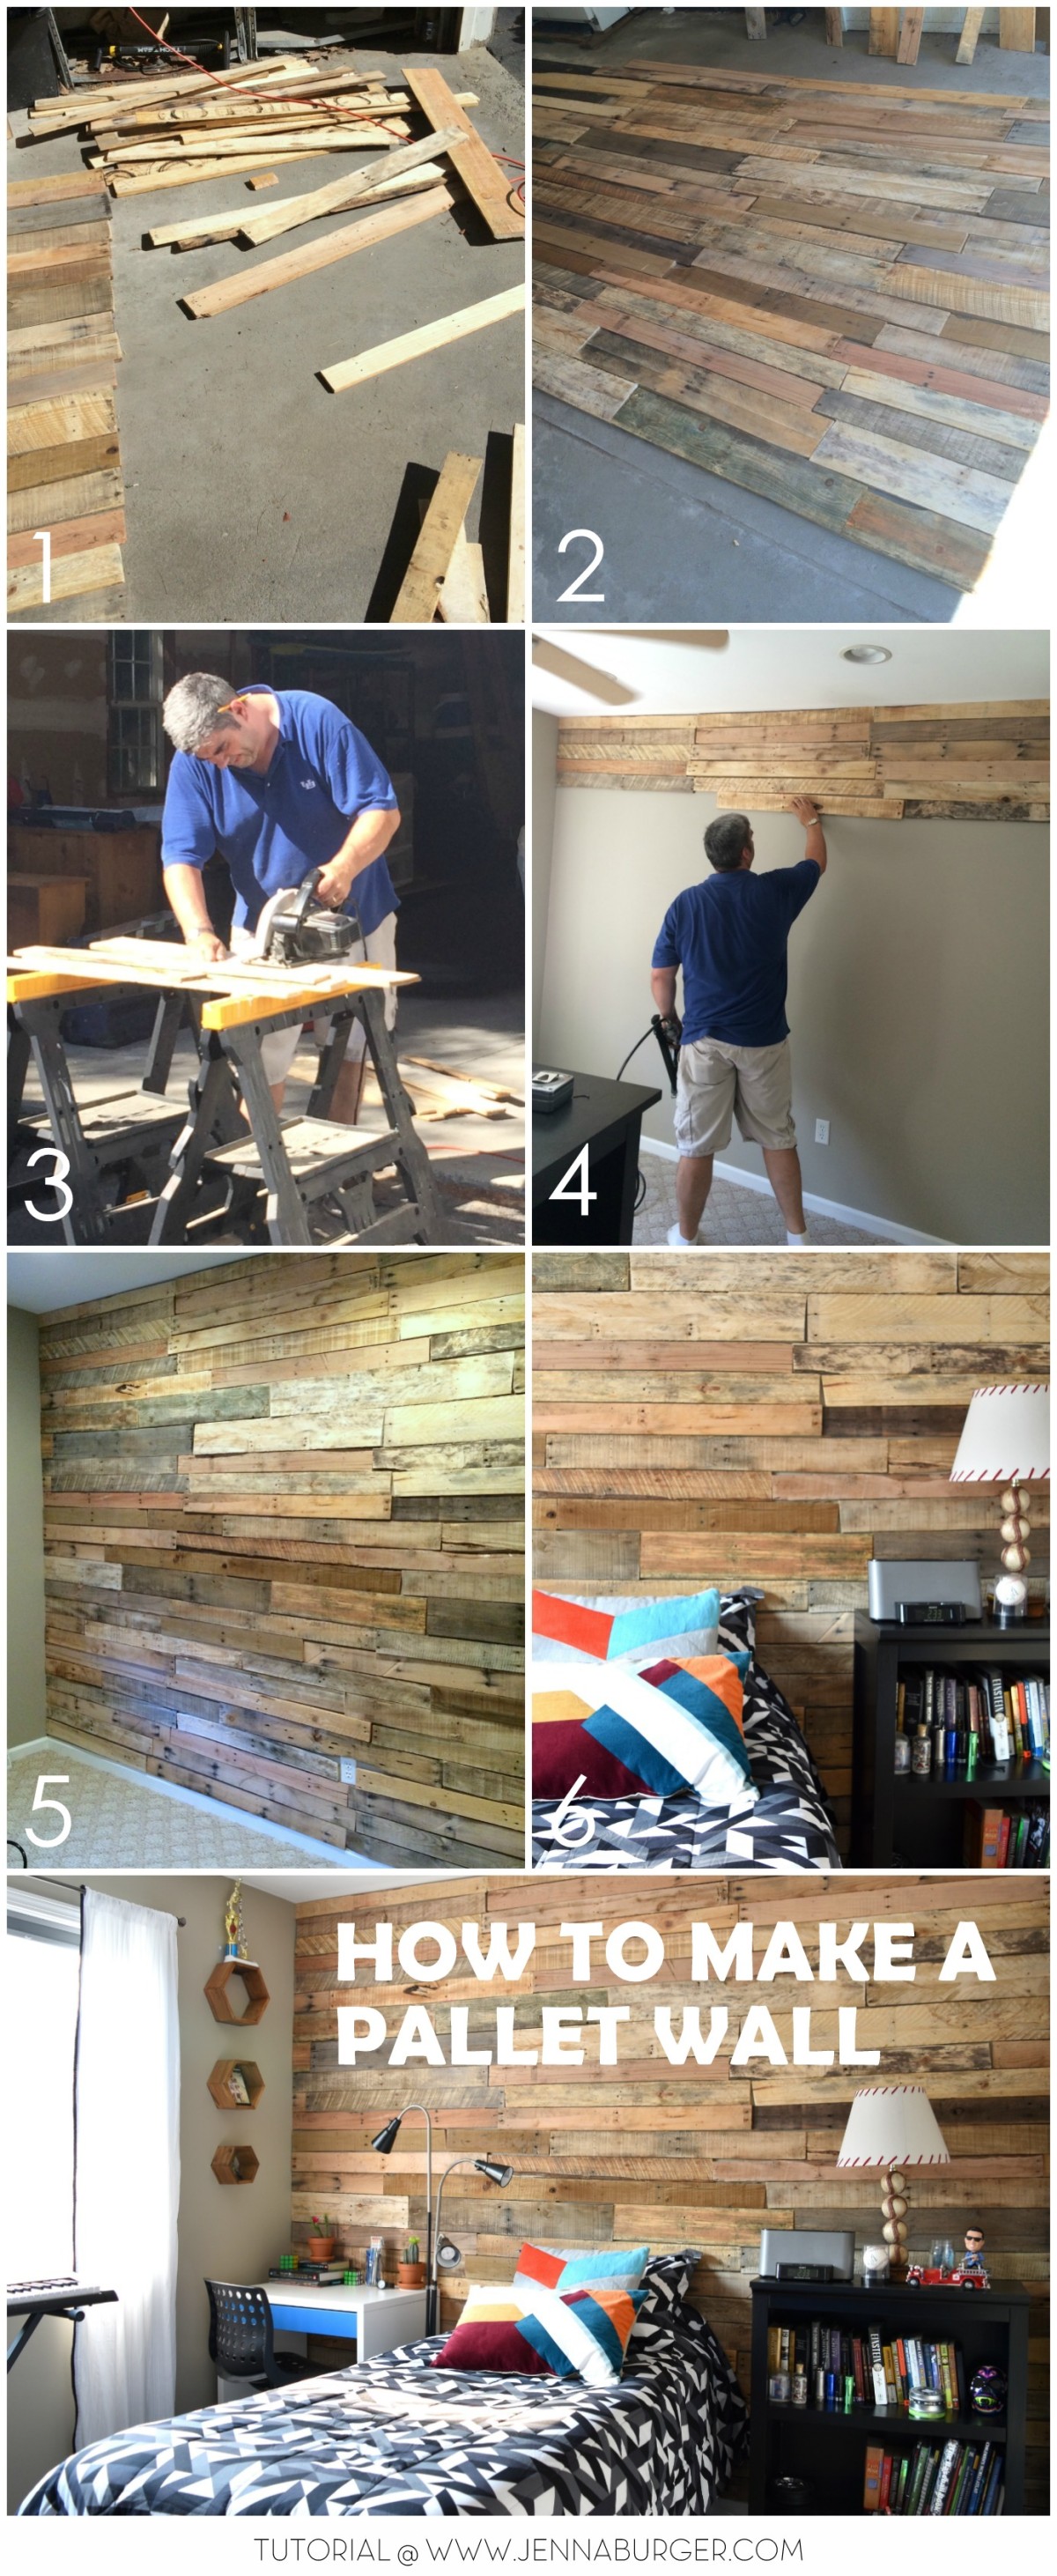 DIY Tutorial for how-to build a pallet wall to create a rustic + warm feel to a space. Lots of labor BUT FREE! Tutorial @ www.JennaBurger.com